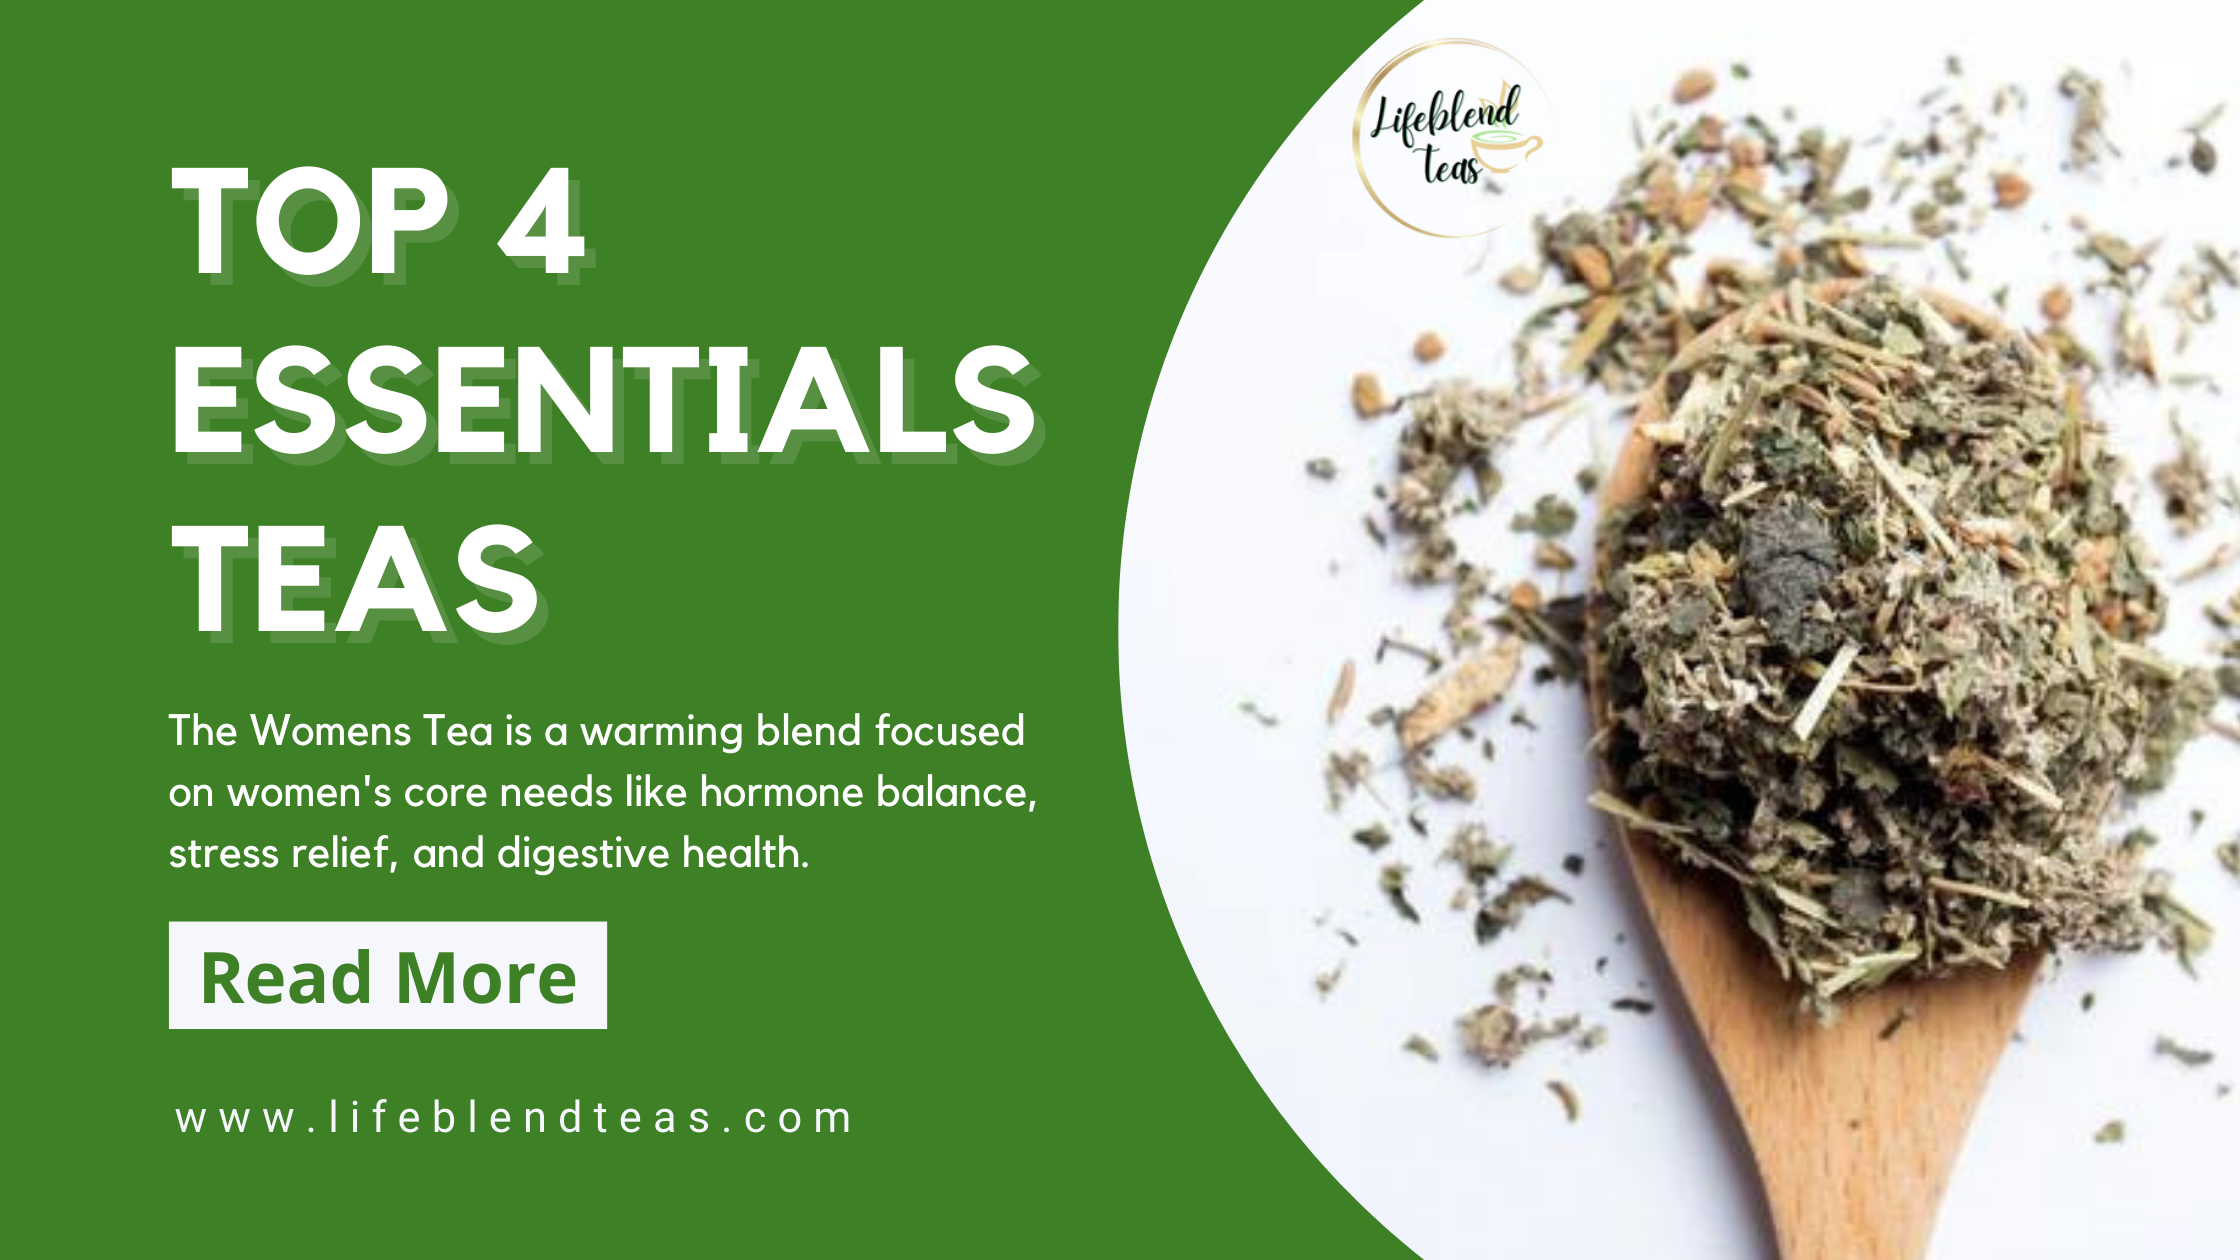 Essentials Teas For Women to Drink For Better Health